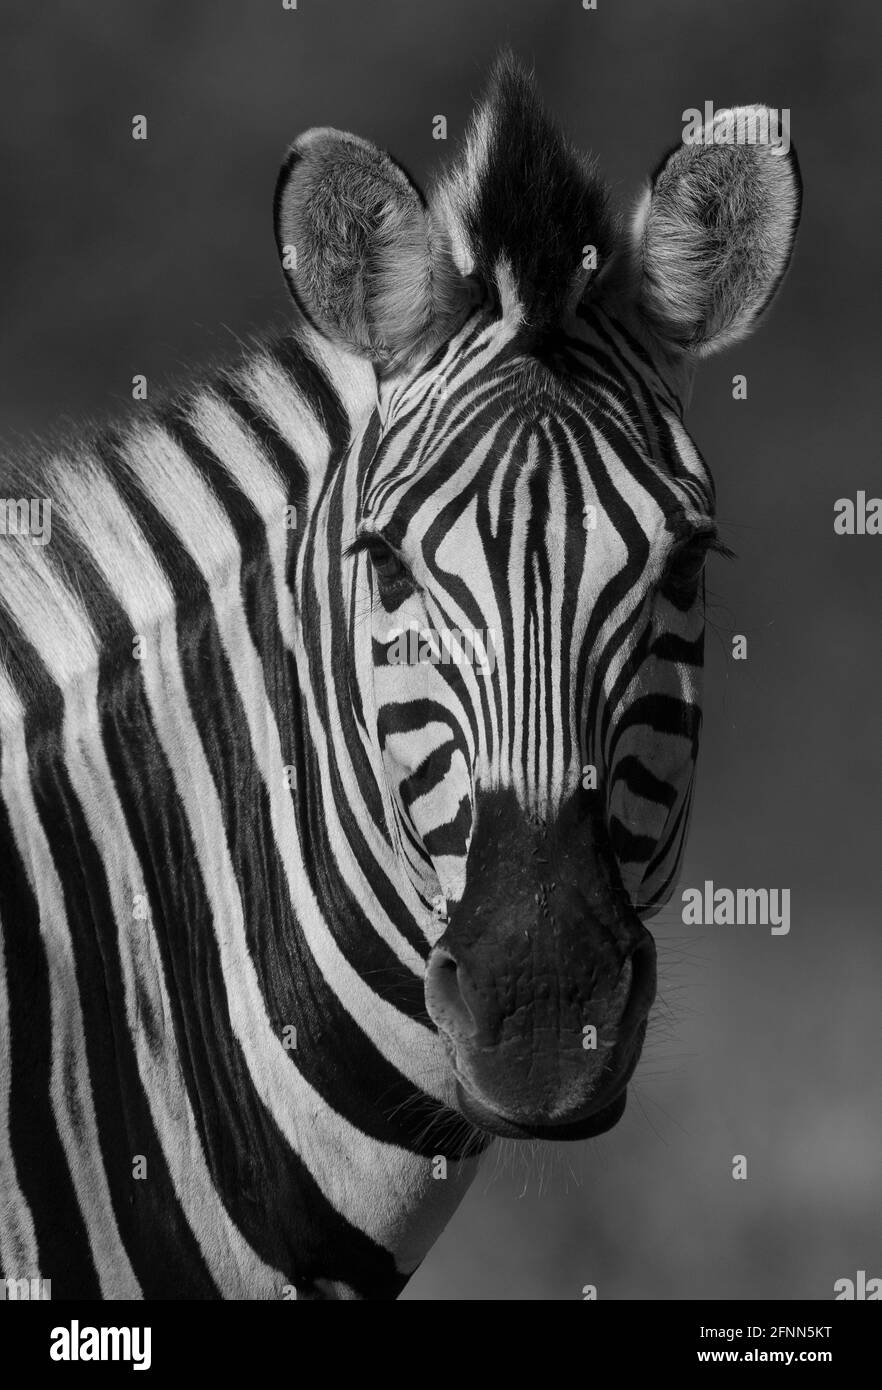 African Zebra in sabannah environment, Kruger National Park, South Africa. Stock Photo